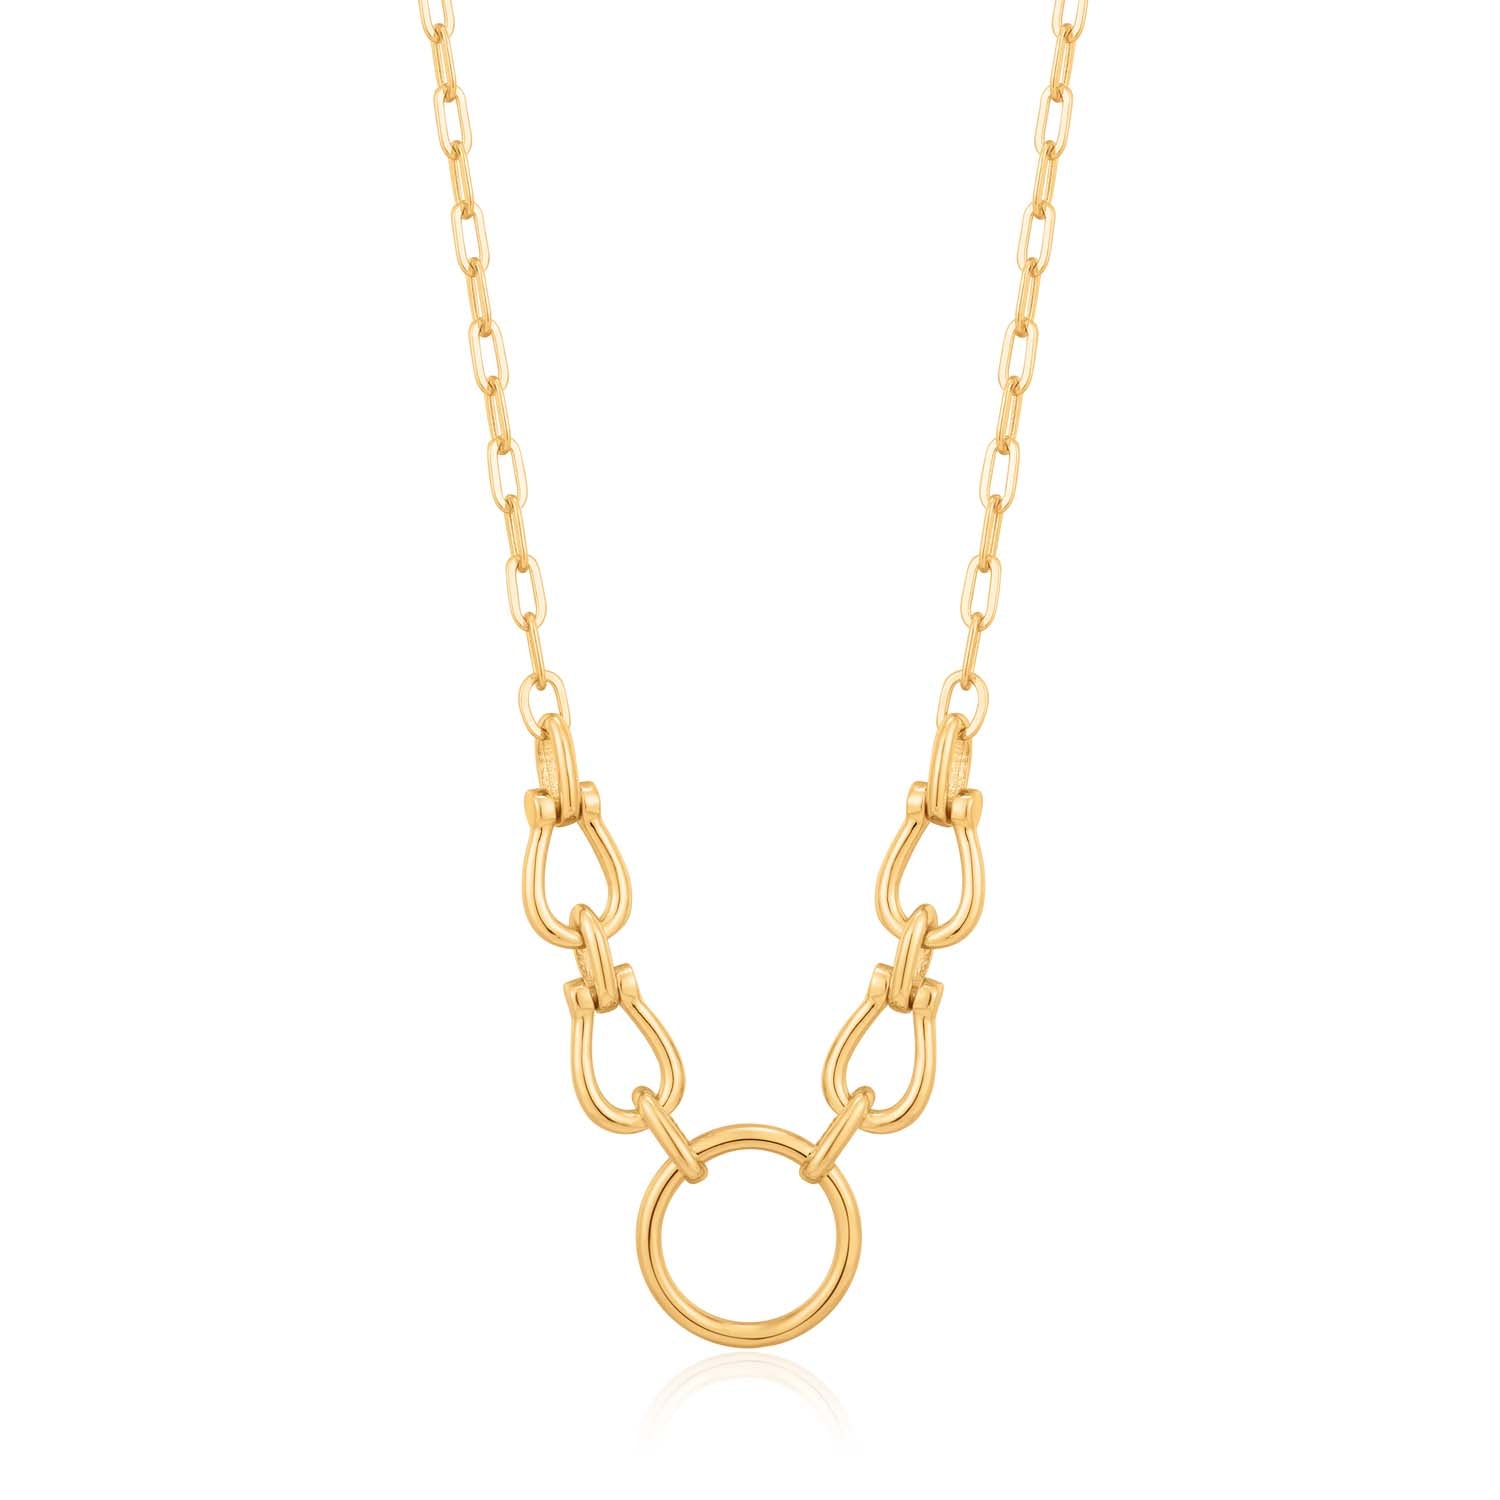 Ania Haie Chain Reaction Horseshoe Link Necklace 40.5cm